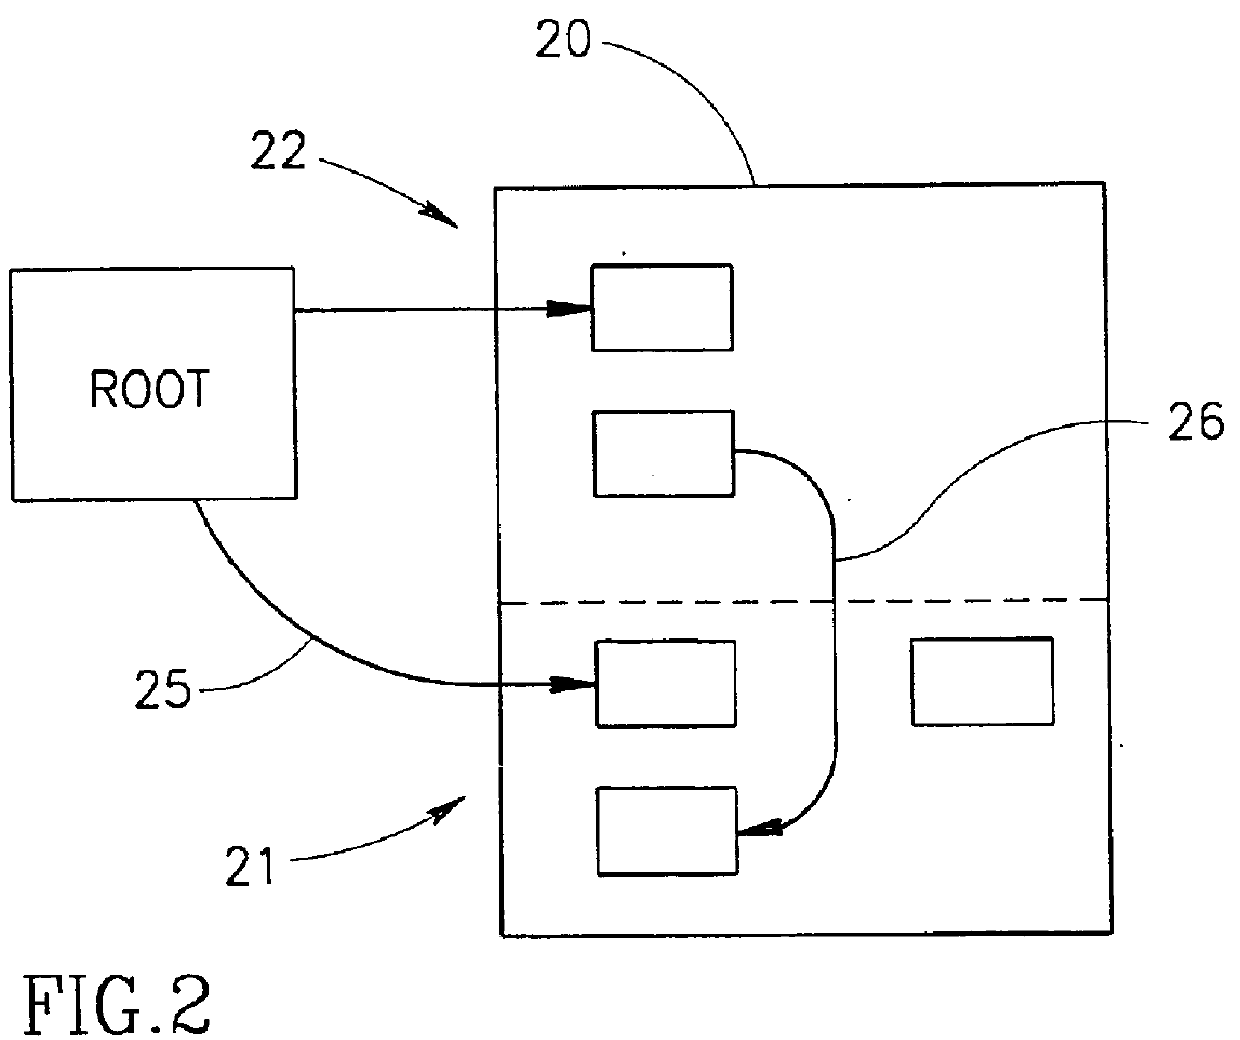 Method for combining card marking with remembered sets for old area of a memory heap